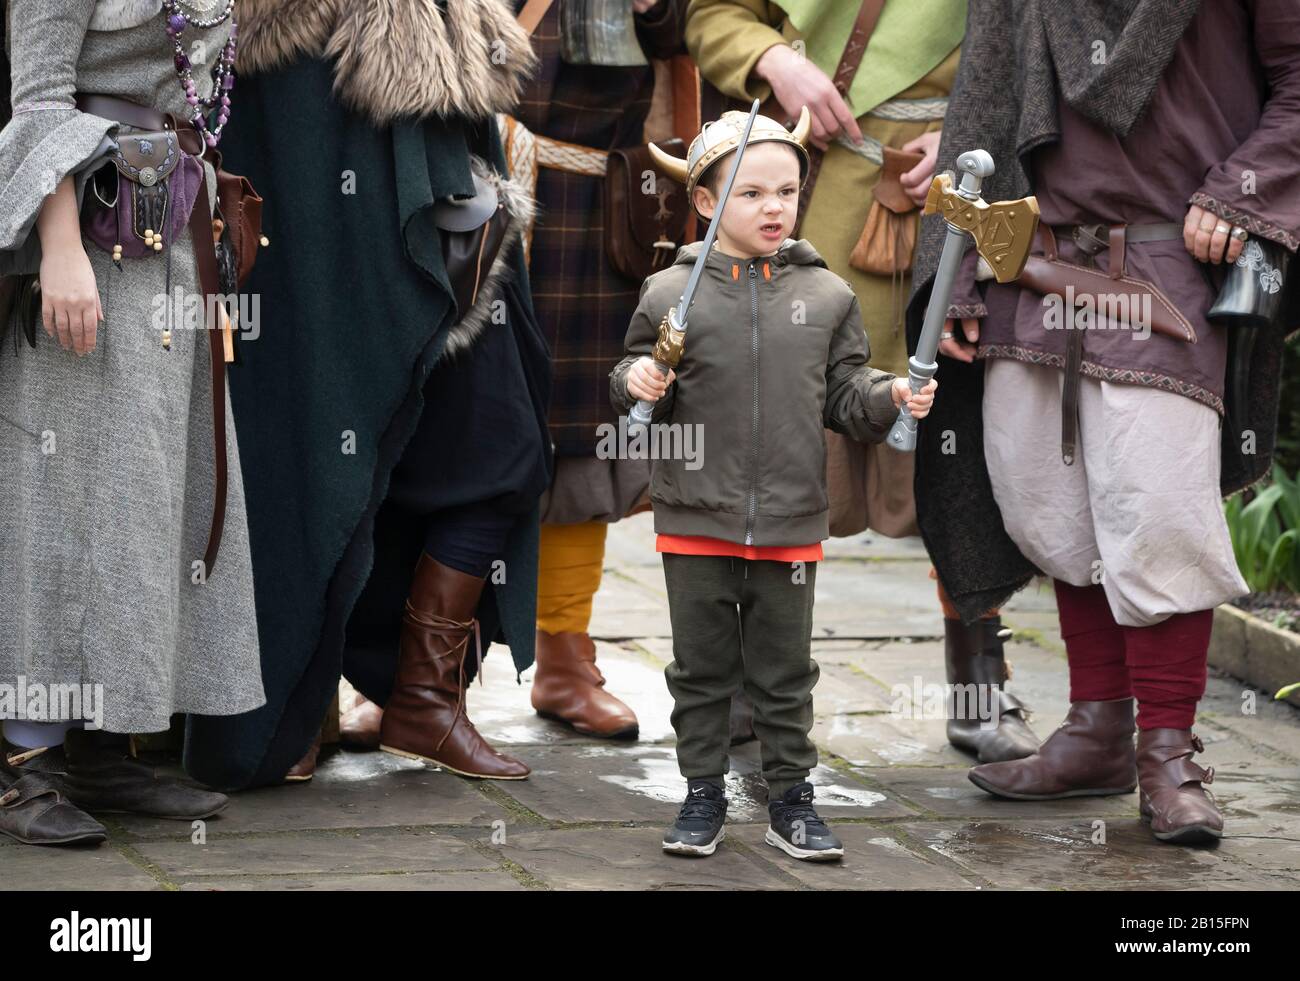 George Nuttall has is photograph taken with Viking re-enactors during the Jorvik Viking Festival in York, recognised as the largest event of its kind in Europe. Stock Photo